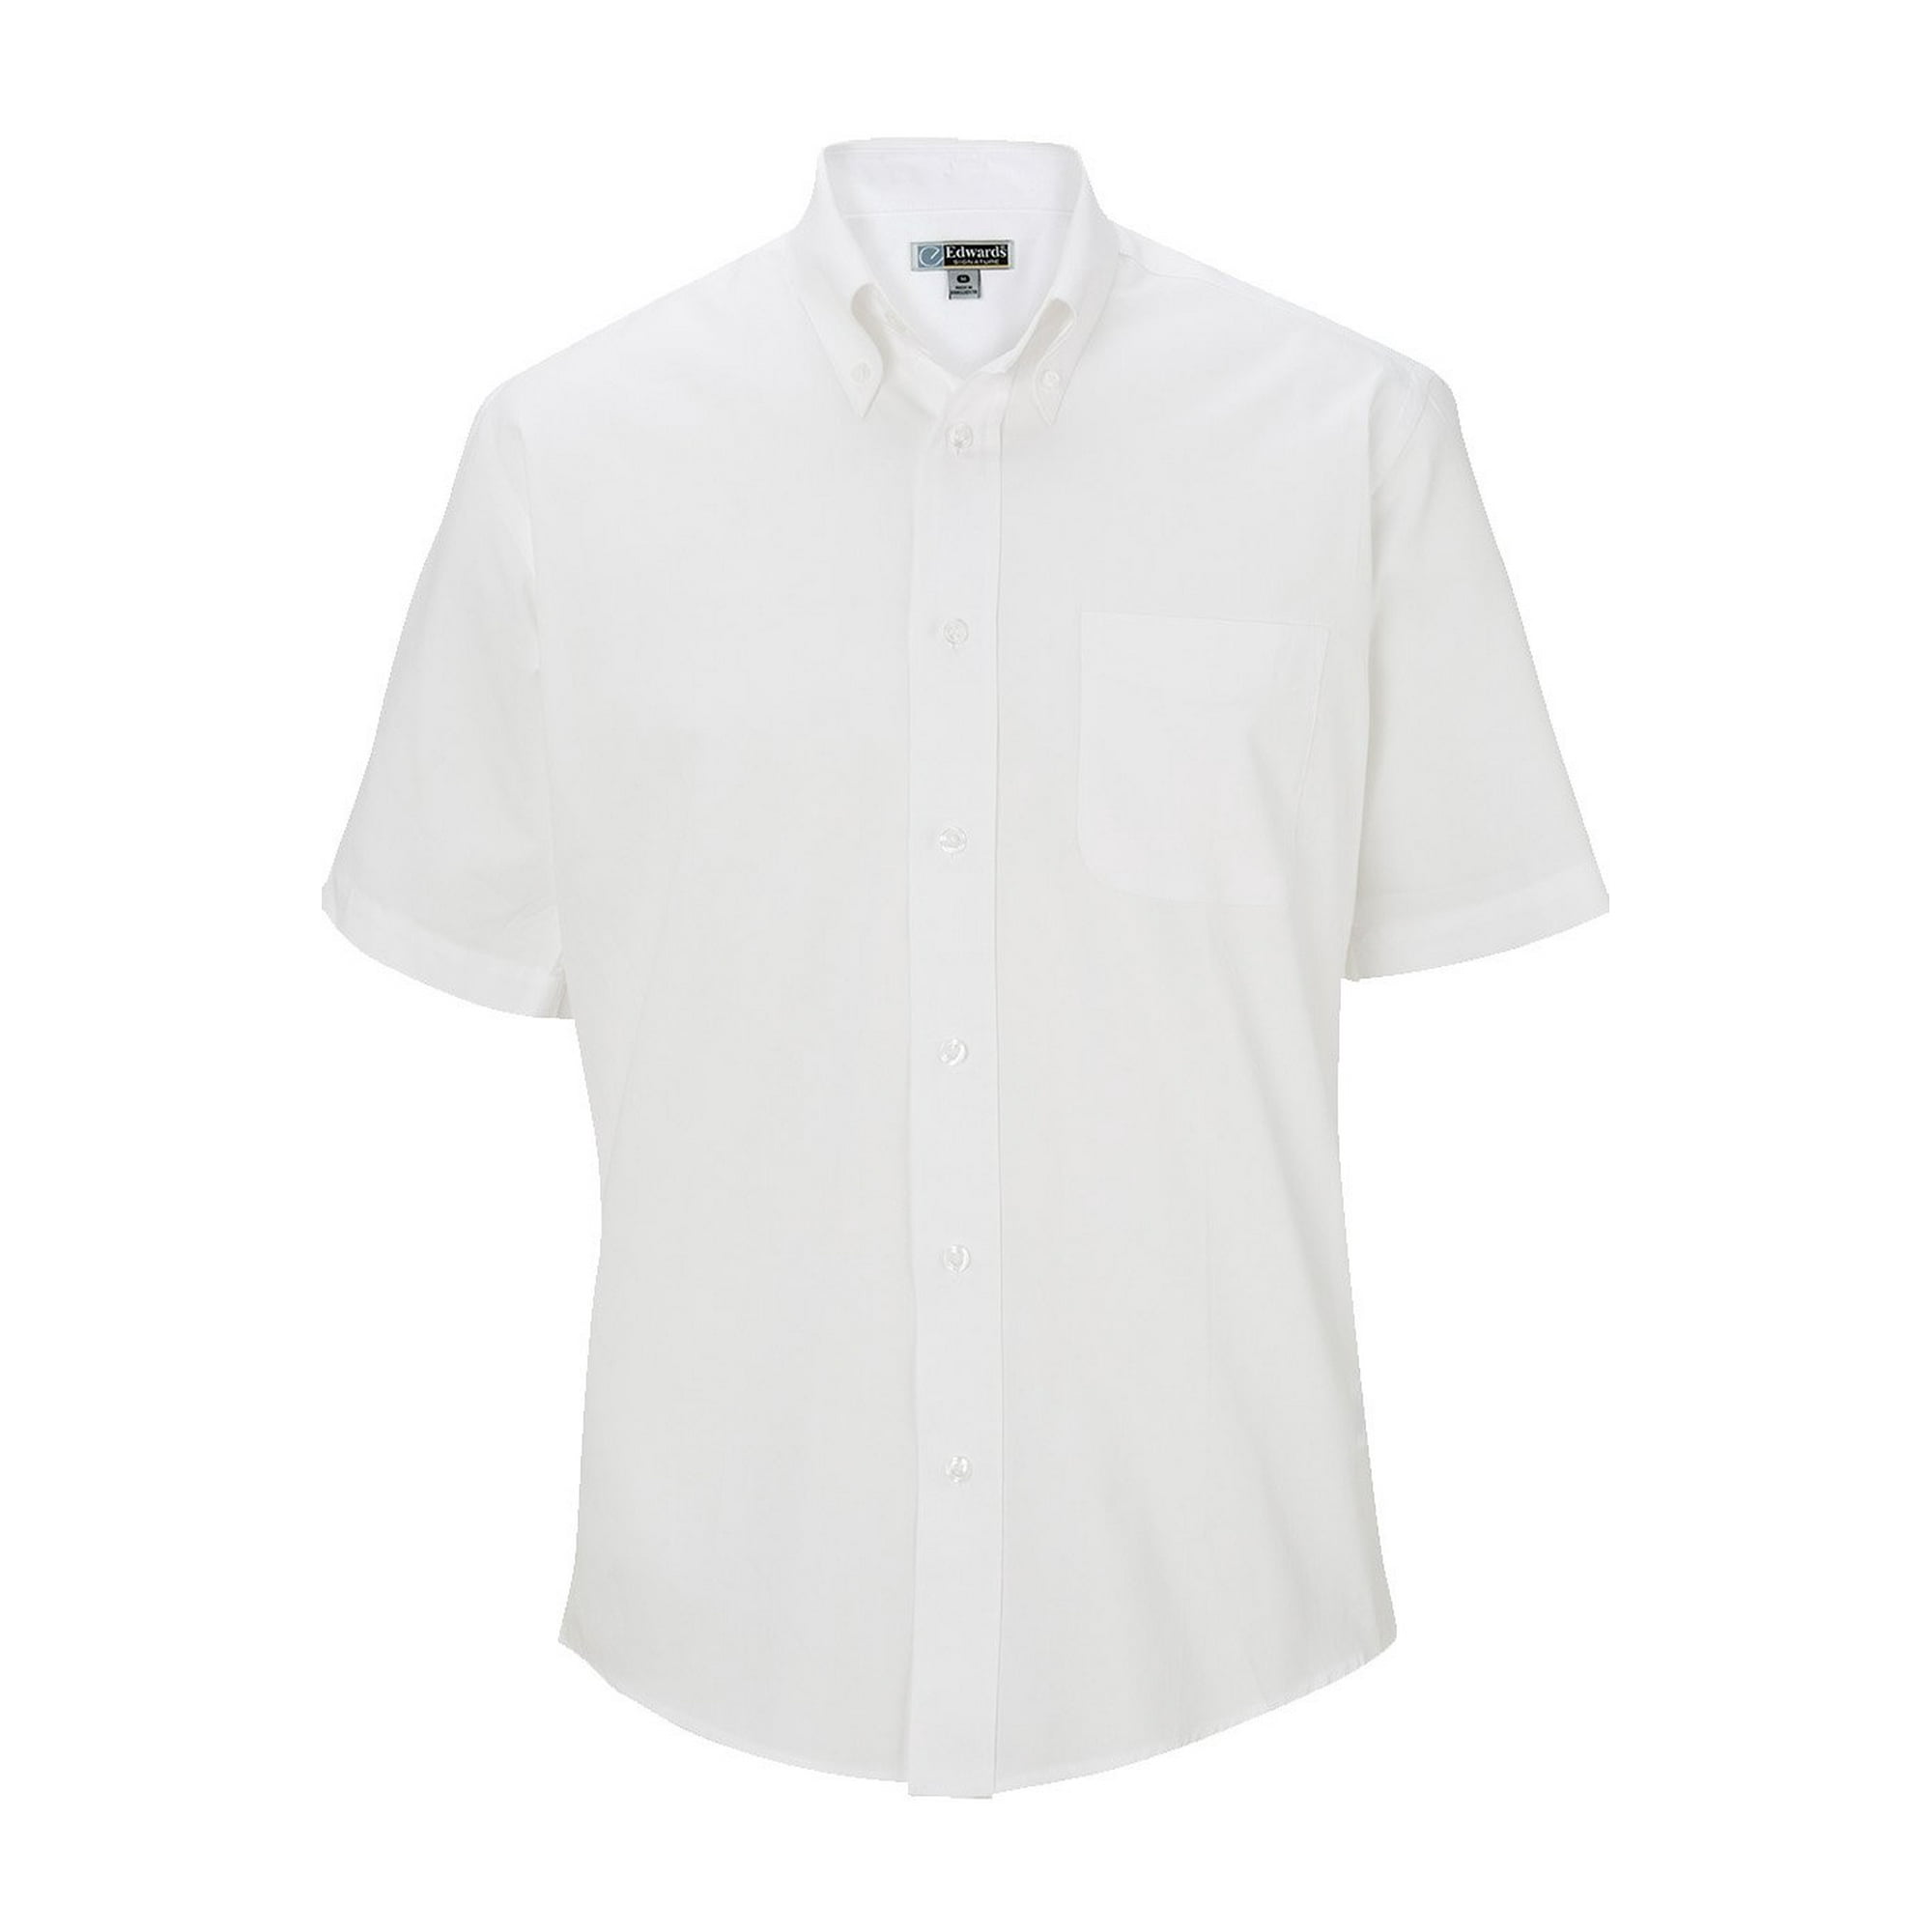 Men's Pinpoint Oxford Short-Sleeve Shirt with Button-Down Collar, Edwards  Garment